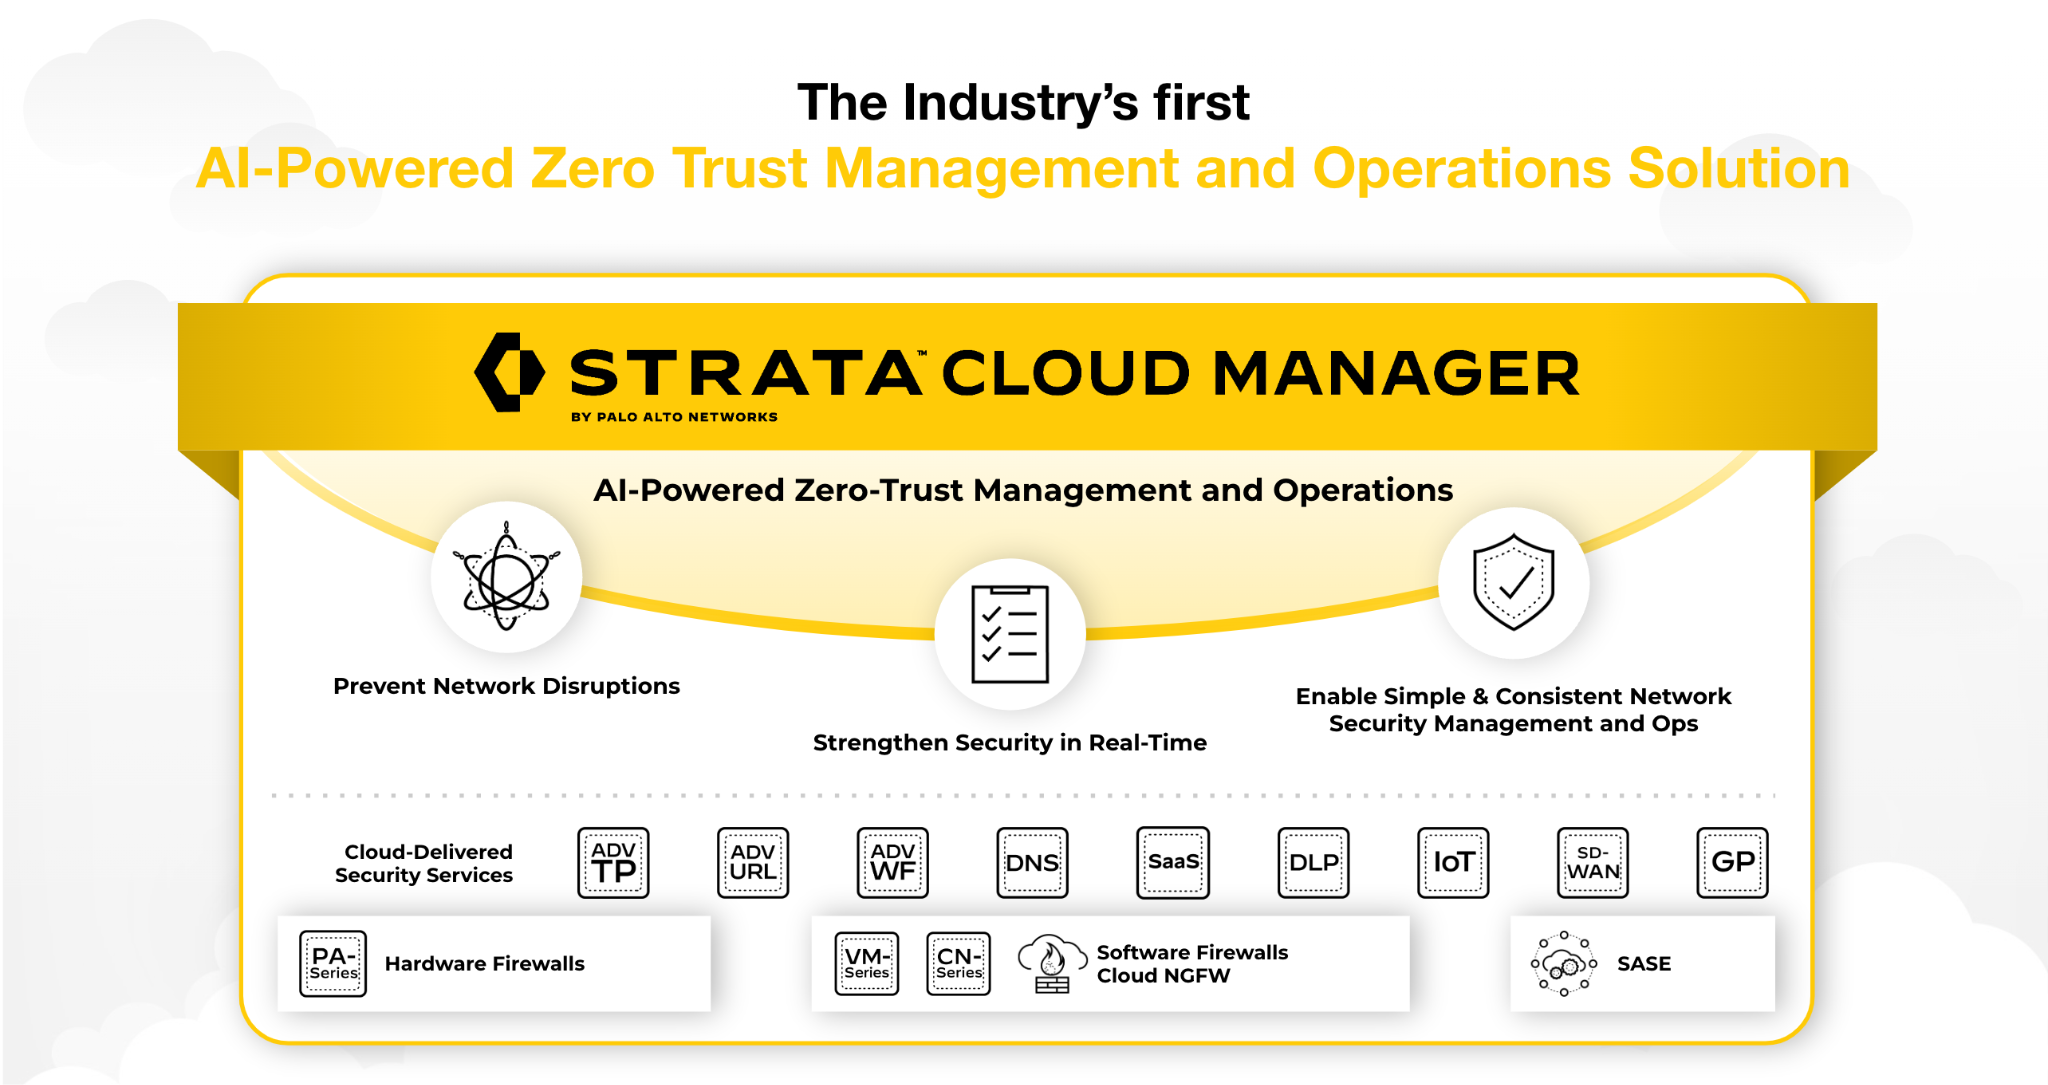 Strata Cloud Manager is the industry’s first AI-powered Zero Trust management and operations solution.